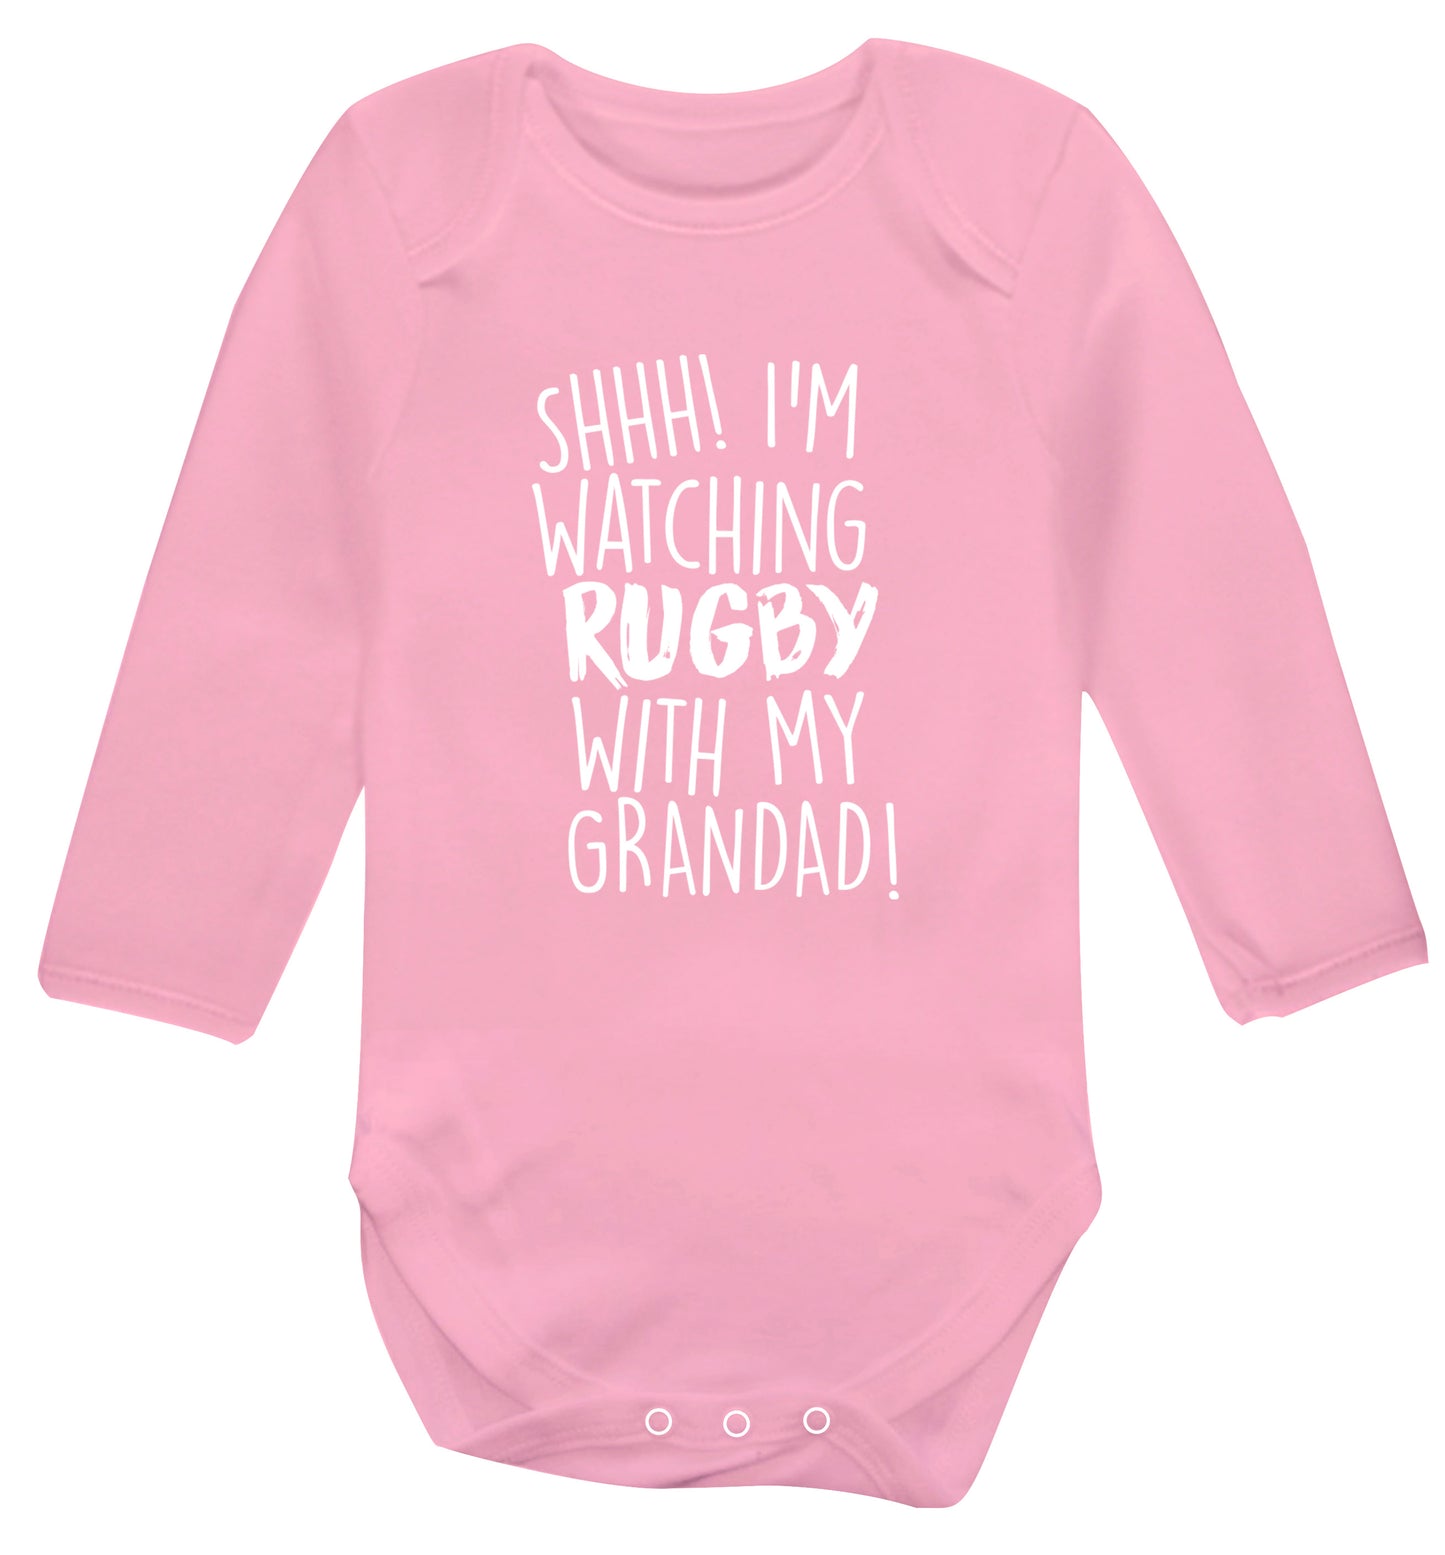 Shh I'm watching rugby with my grandad Baby Vest long sleeved pale pink 6-12 months